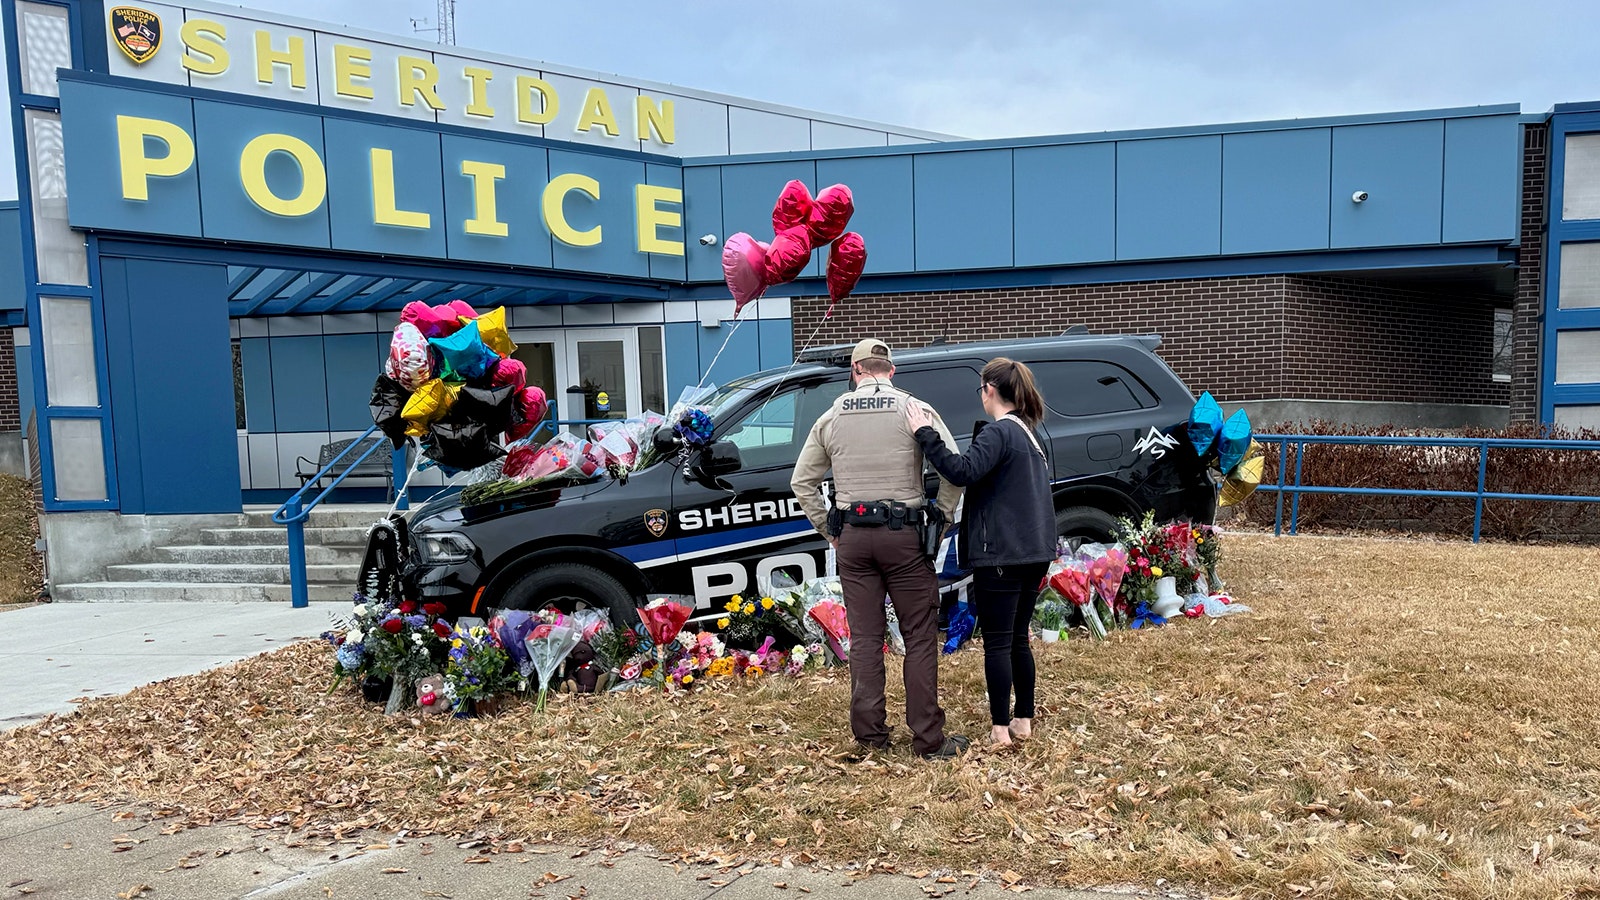 Sheridan County Sheriff's Office Deputy Braydon Dempsey and his wife Addison Dempsey at a memorial for Sheridan Police Sgt. Nevada Krinkee, which has been growing throughout the day Wednesday.